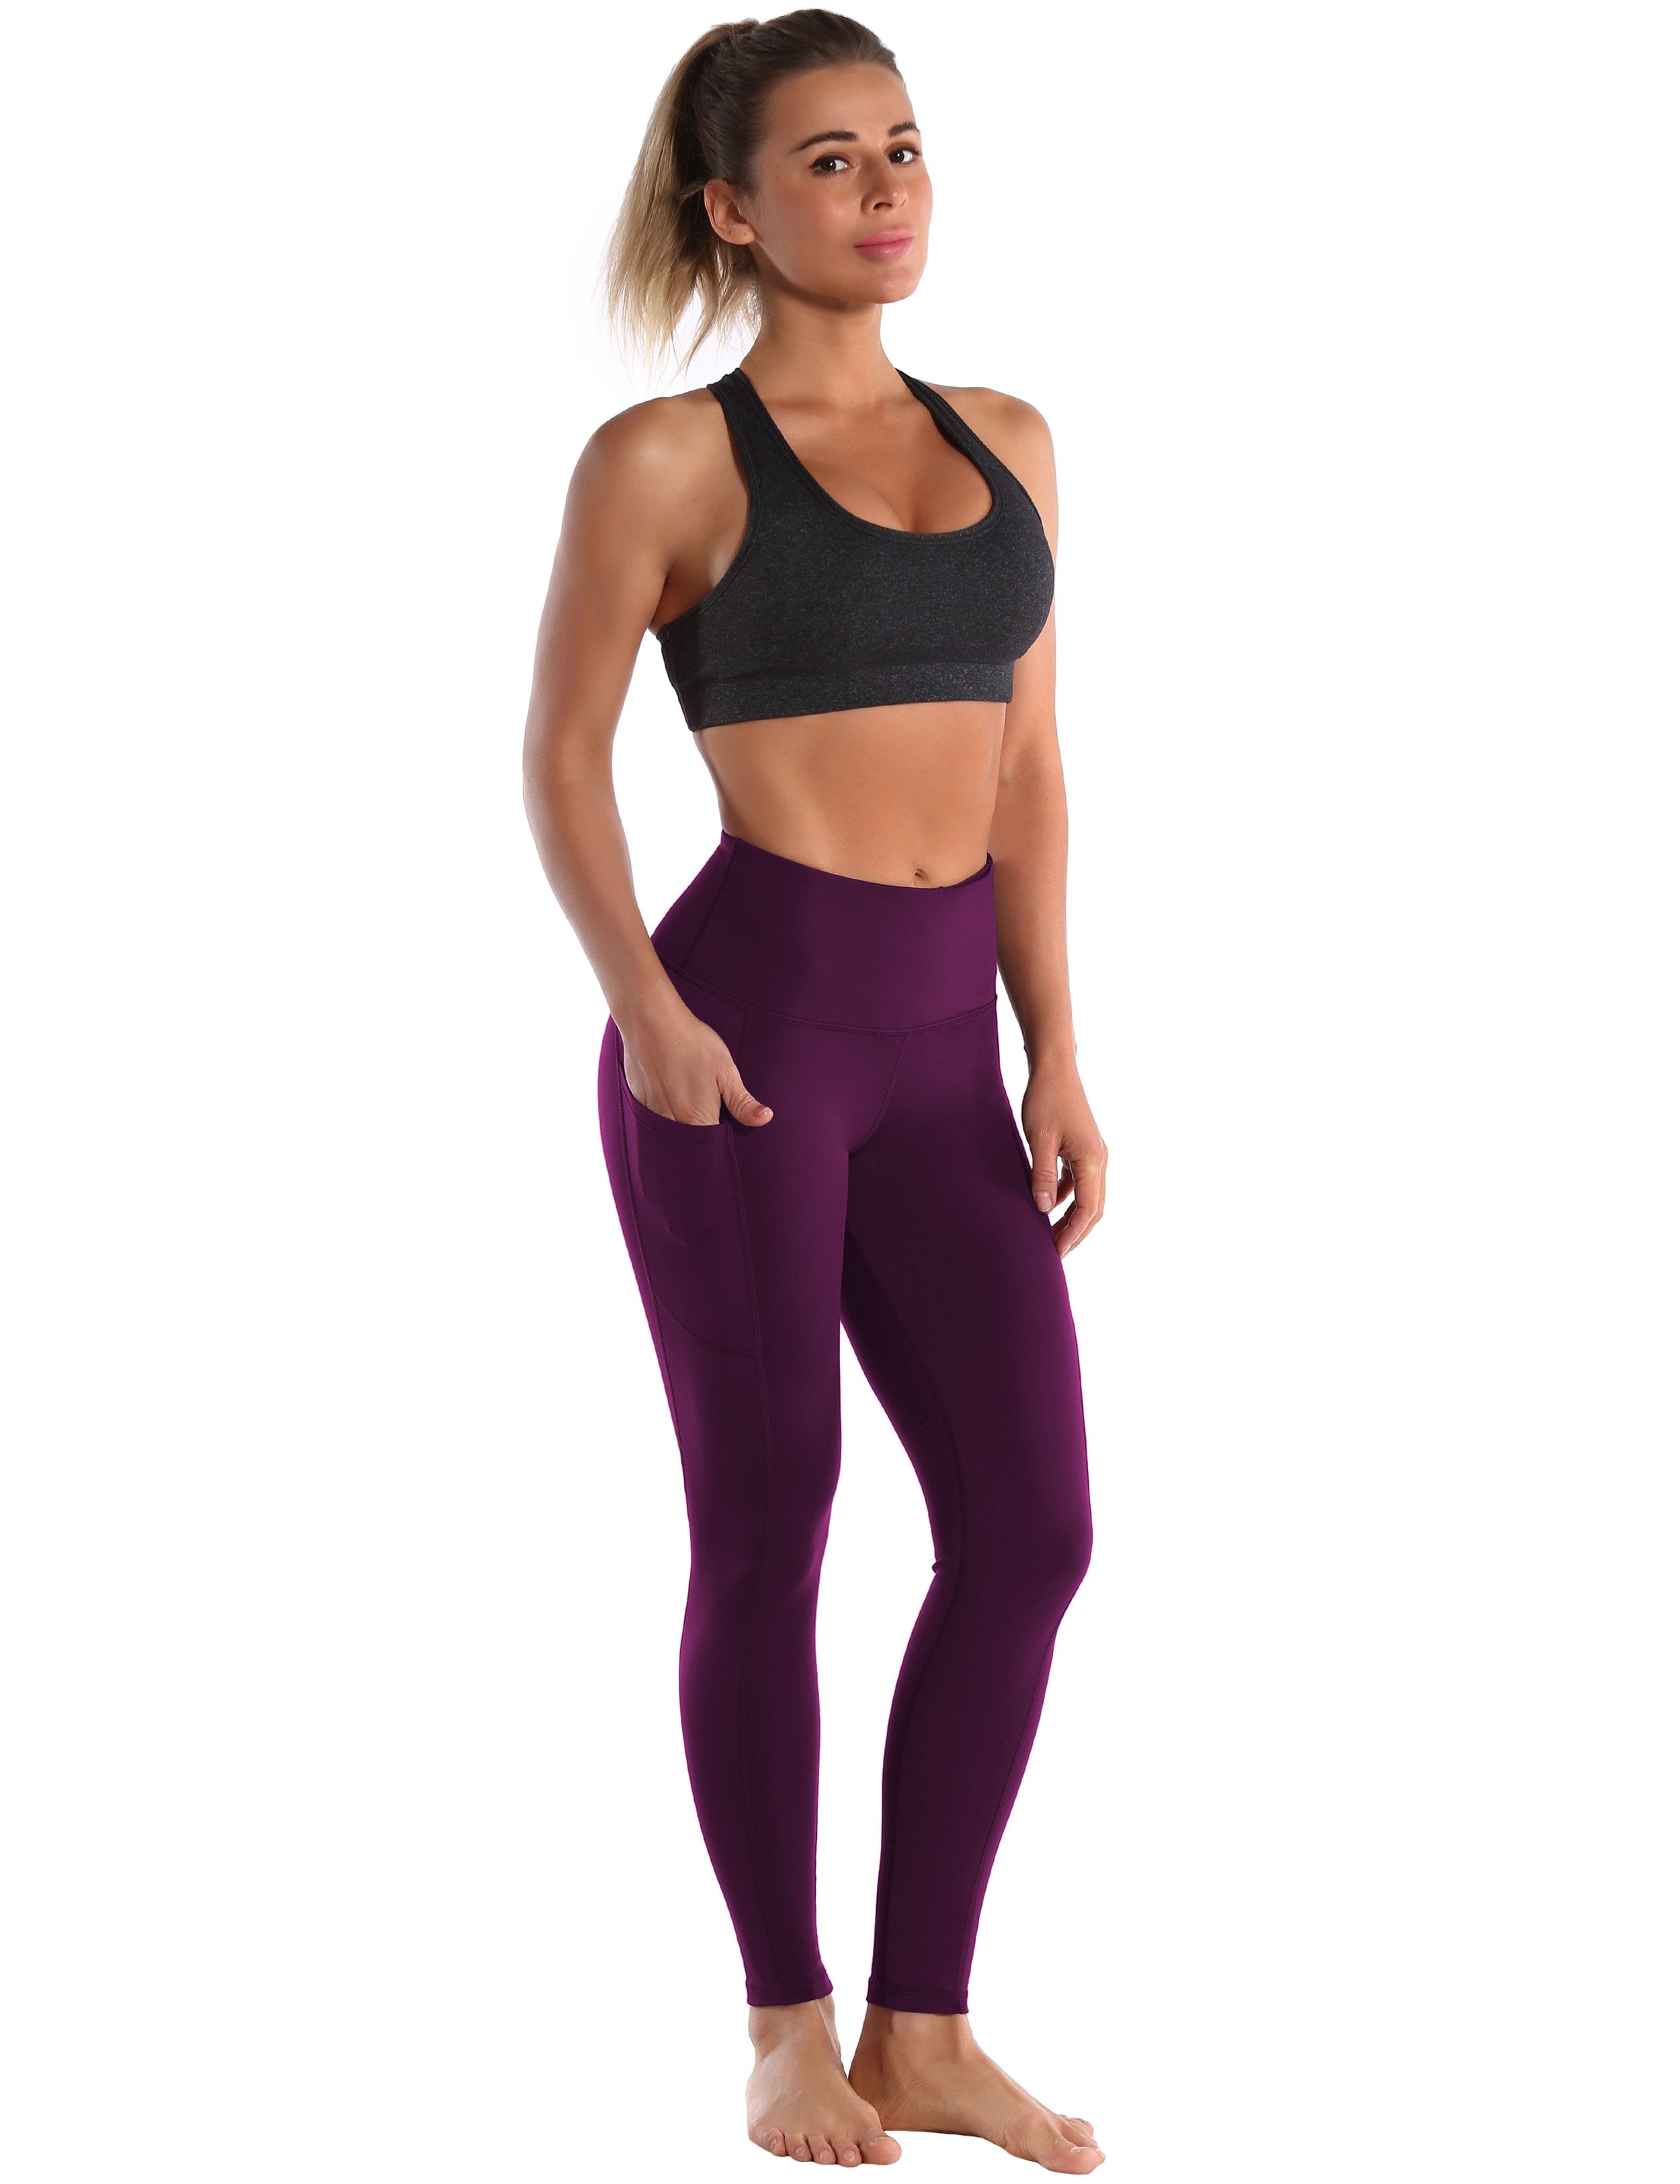 Hip Line Side Pockets Running Pants grapevine Sexy Hip Line Side Pockets 75%Nylon/25%Spandex Fabric doesn't attract lint easily 4-way stretch No see-through Moisture-wicking Tummy control Inner pocket Two lengths